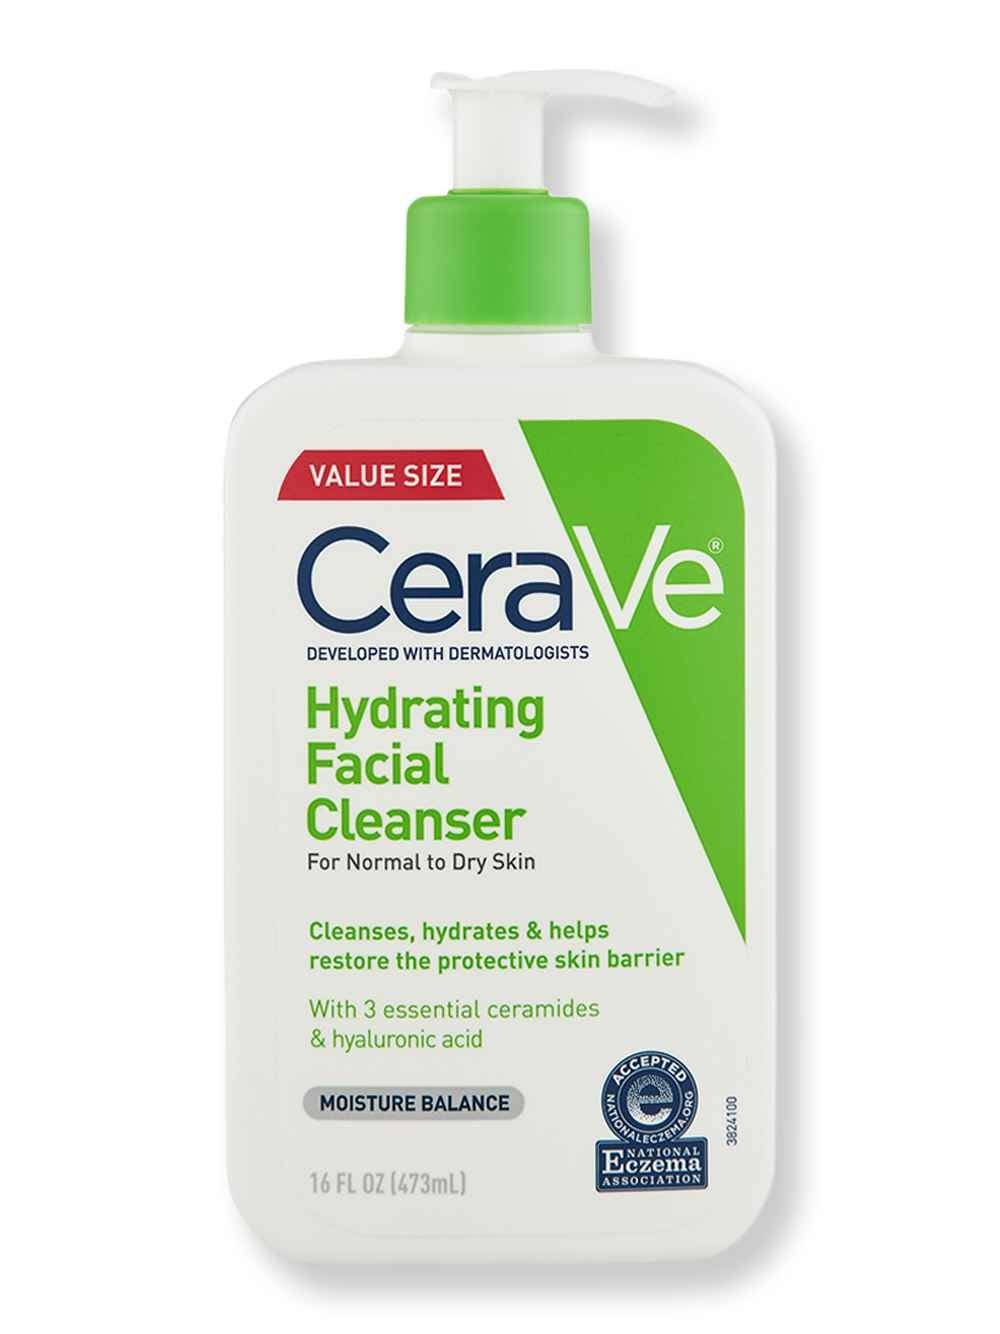 CeraVe Hydrating Facial Cleanser for Normal to Dry Skin - 473ml